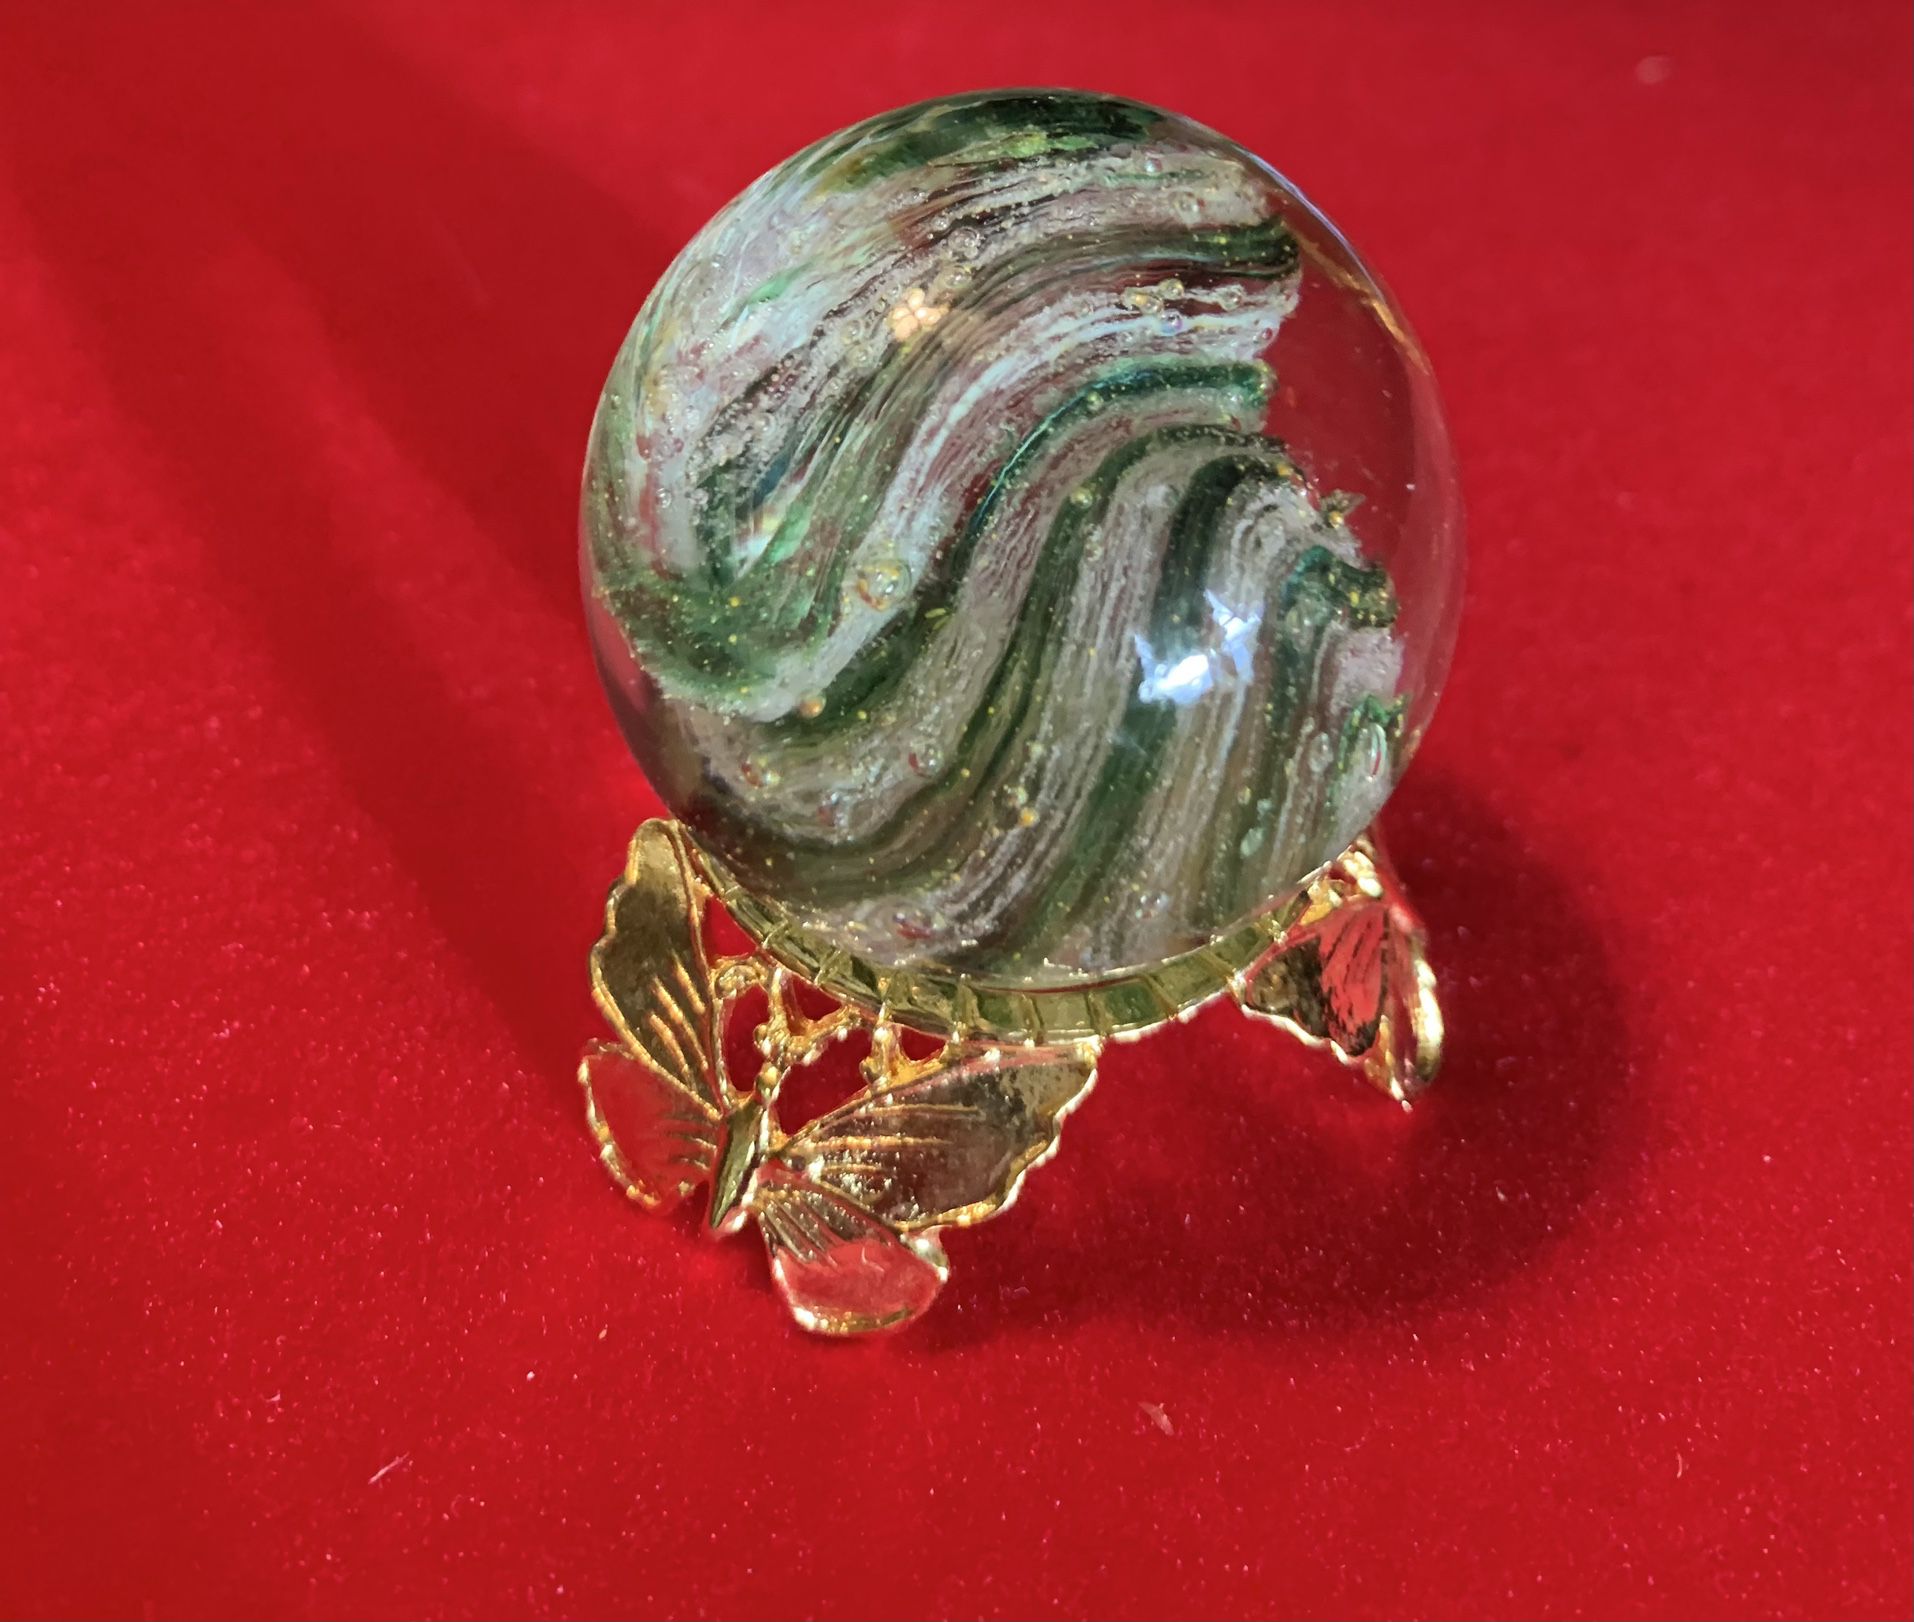 Decorative Paperweight